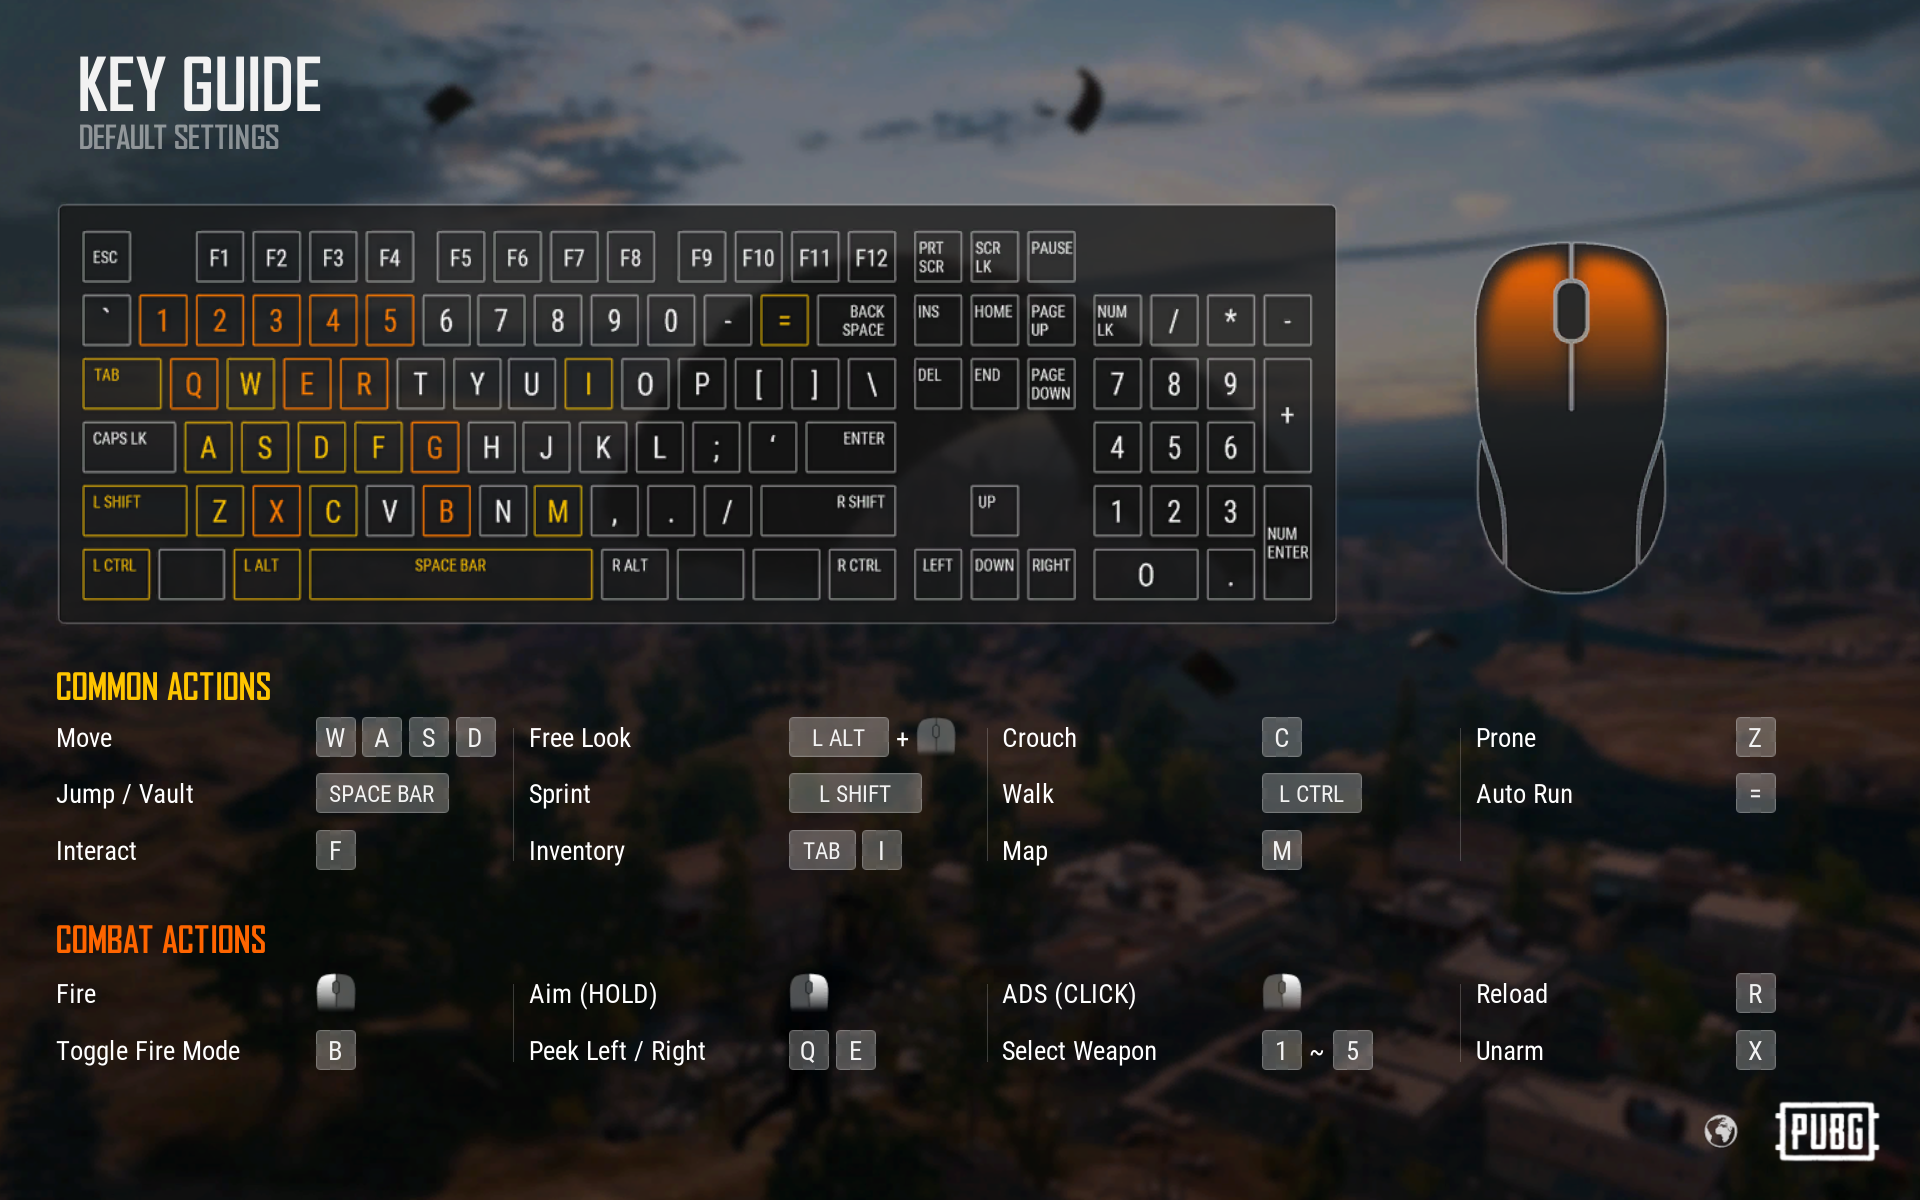 mouse auto clicker key bind